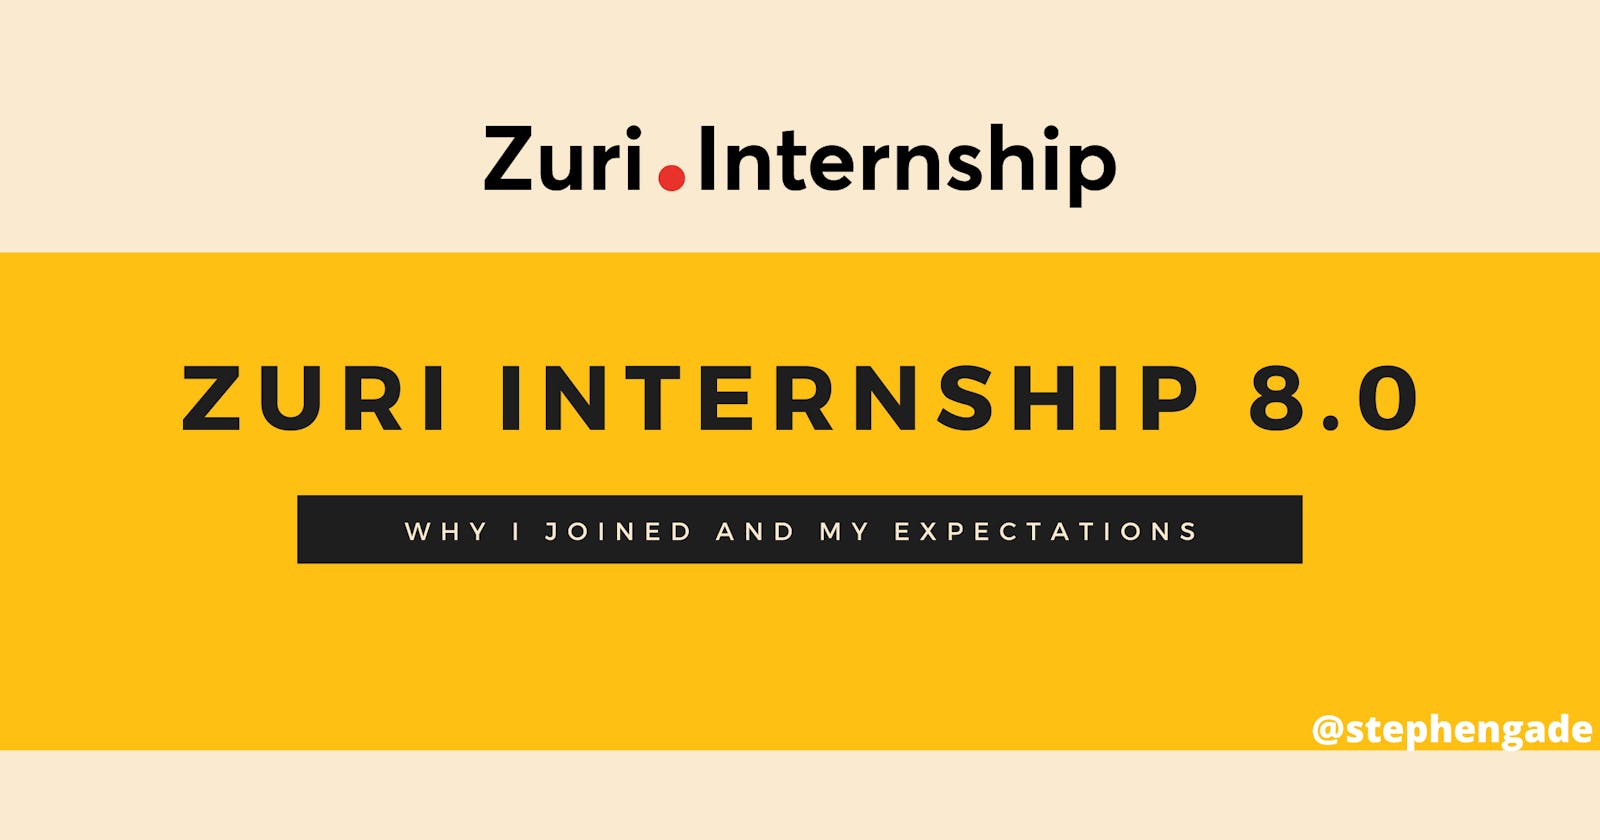 Zuri Internship 8.0: Why I Joined, My Expectation and Goal(s)